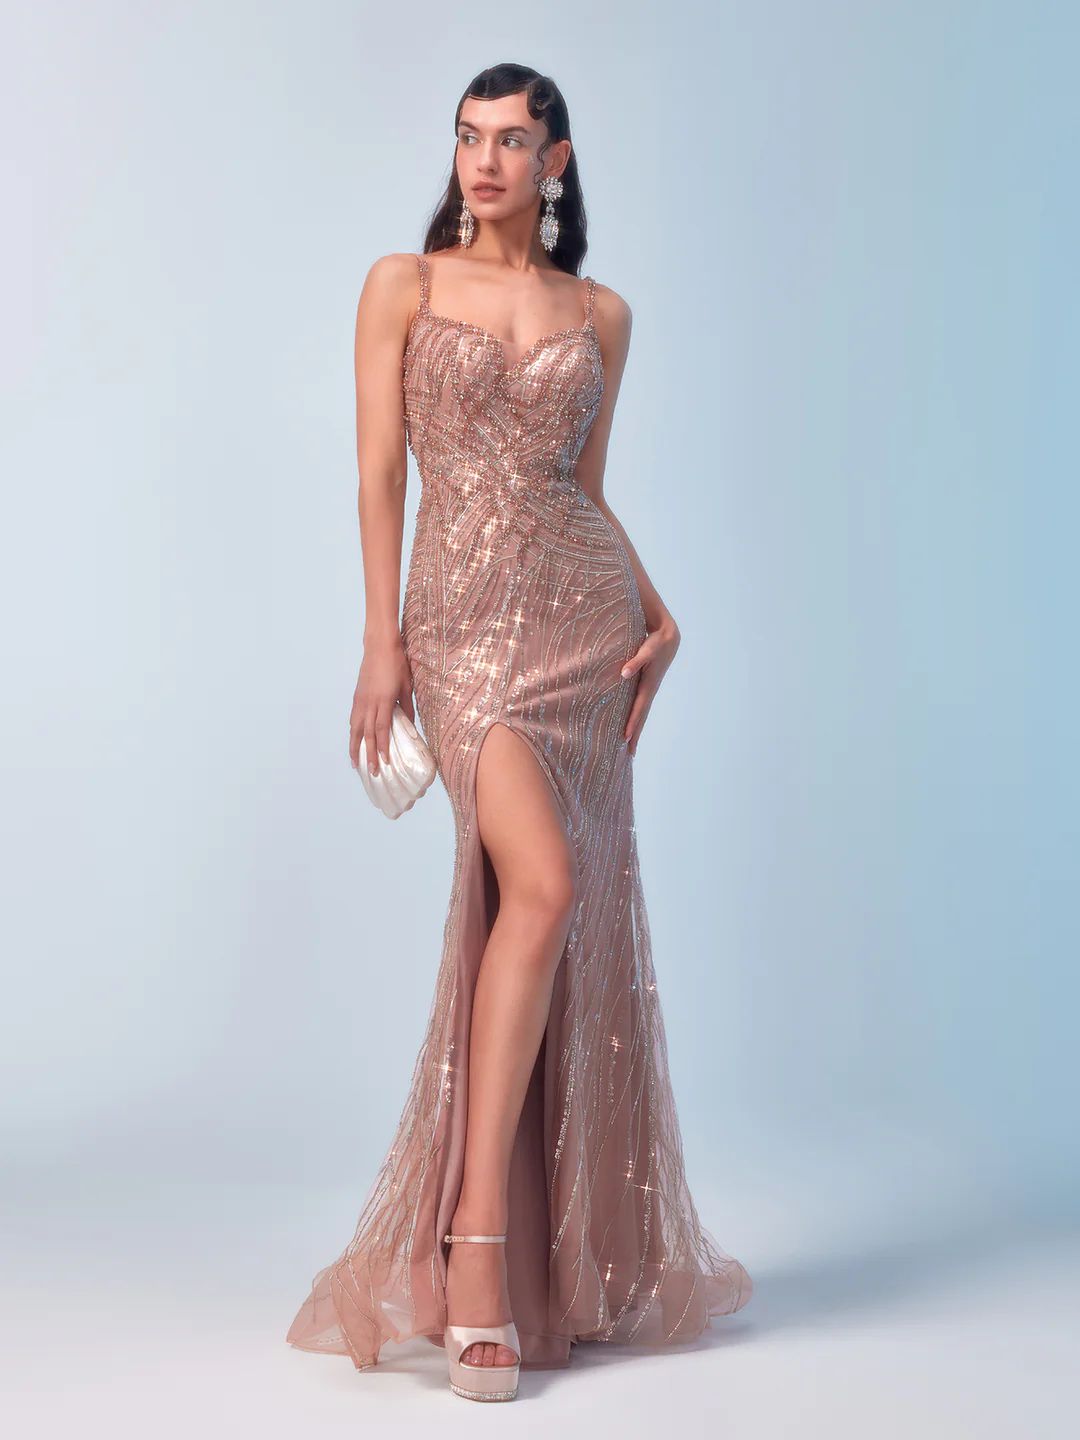 Handcrafted Beaded Streamline Gown | Richradiqs